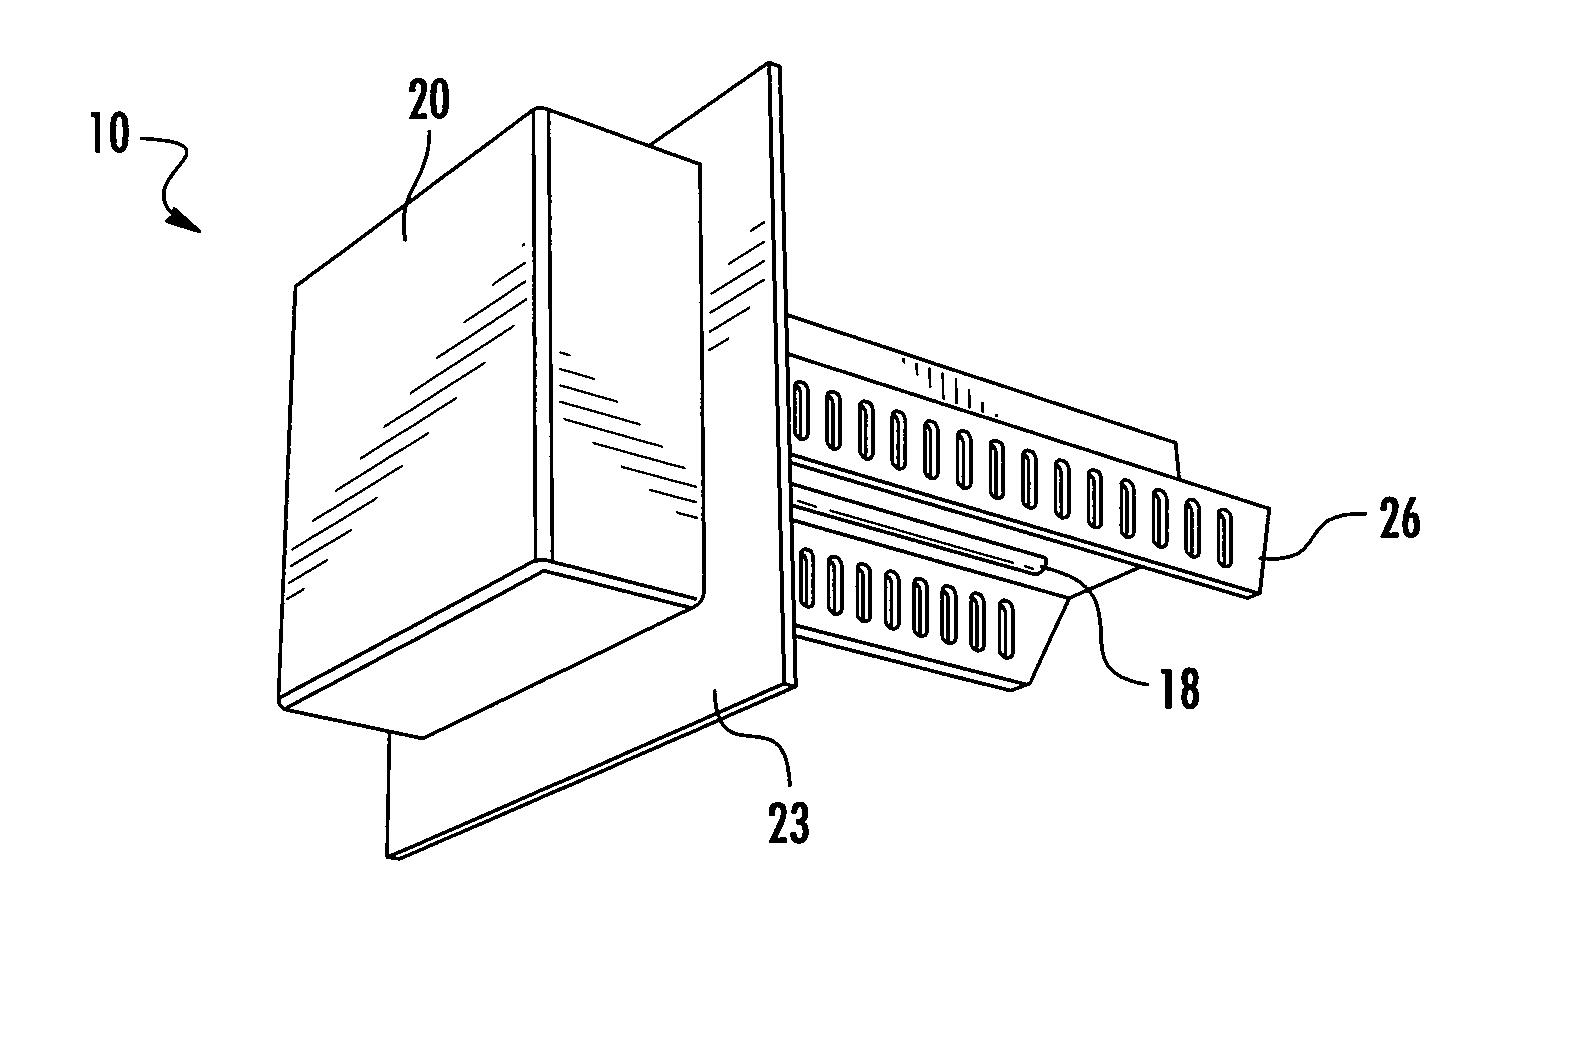 Adsorptive photo-catalytic oxidation air purification device